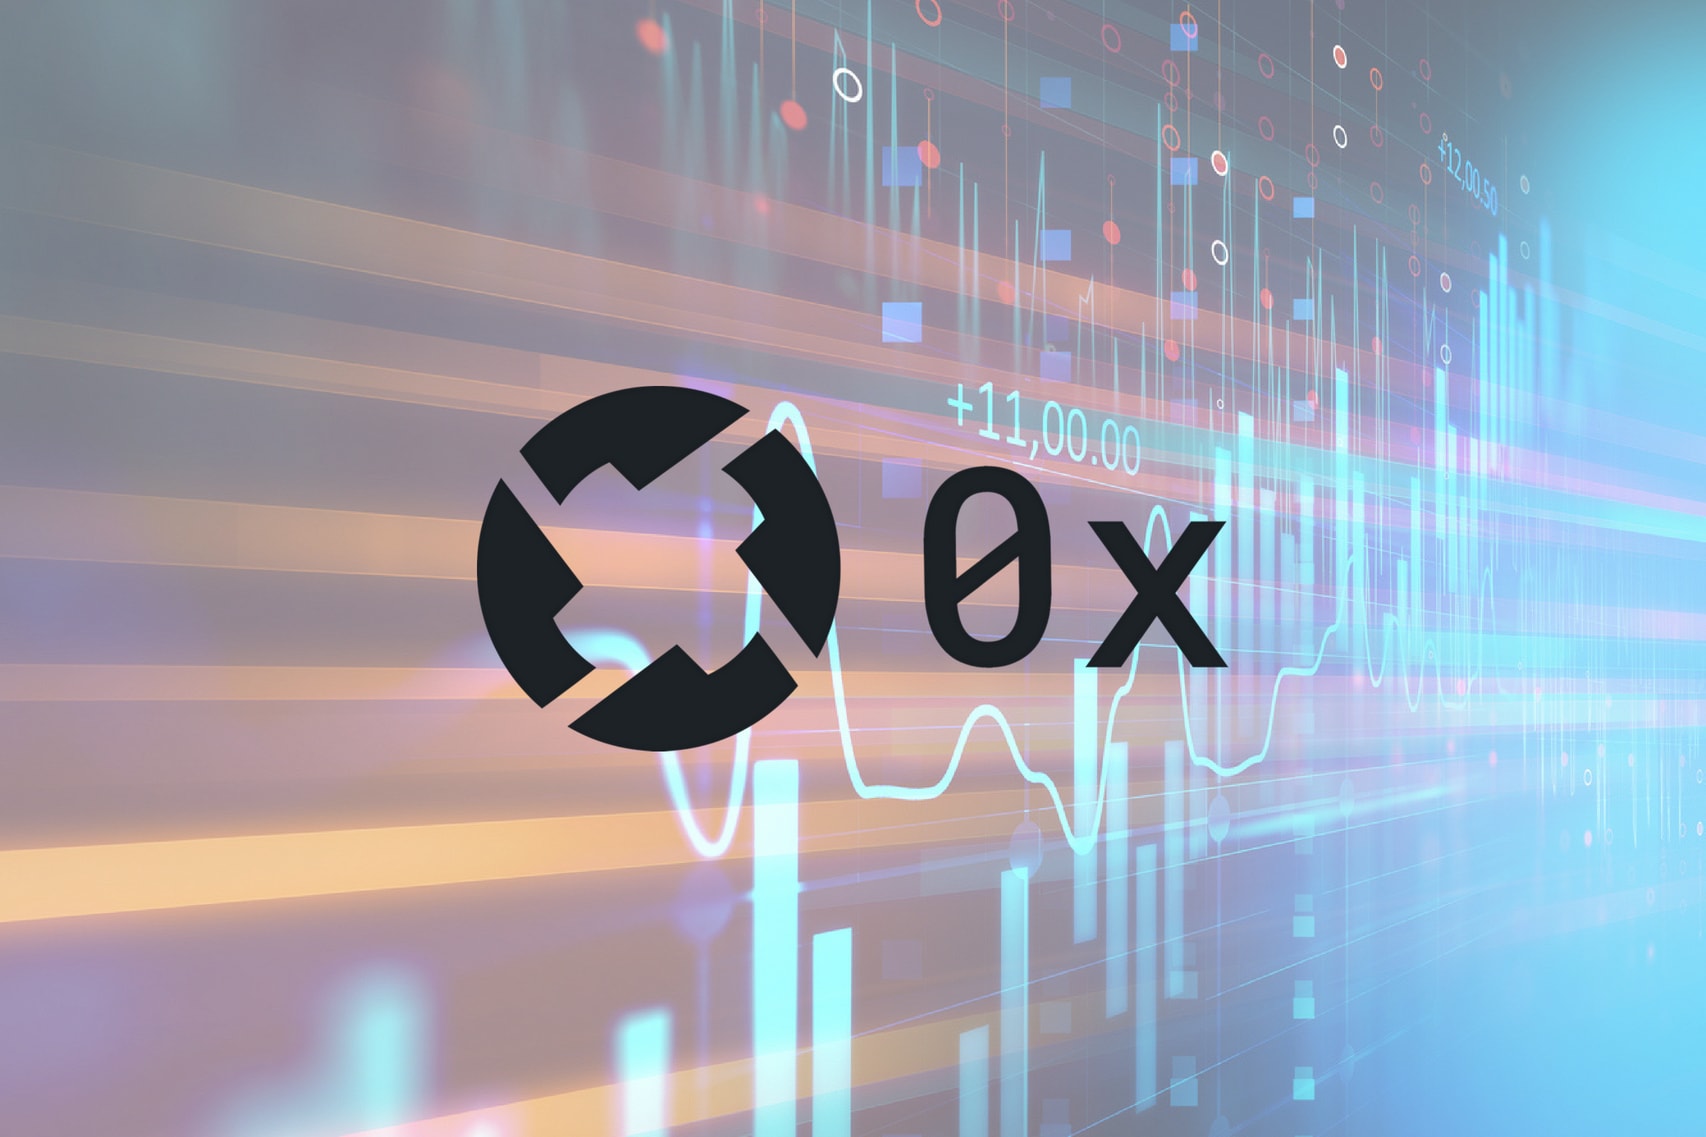  zrx outstanding coin development price latest story 